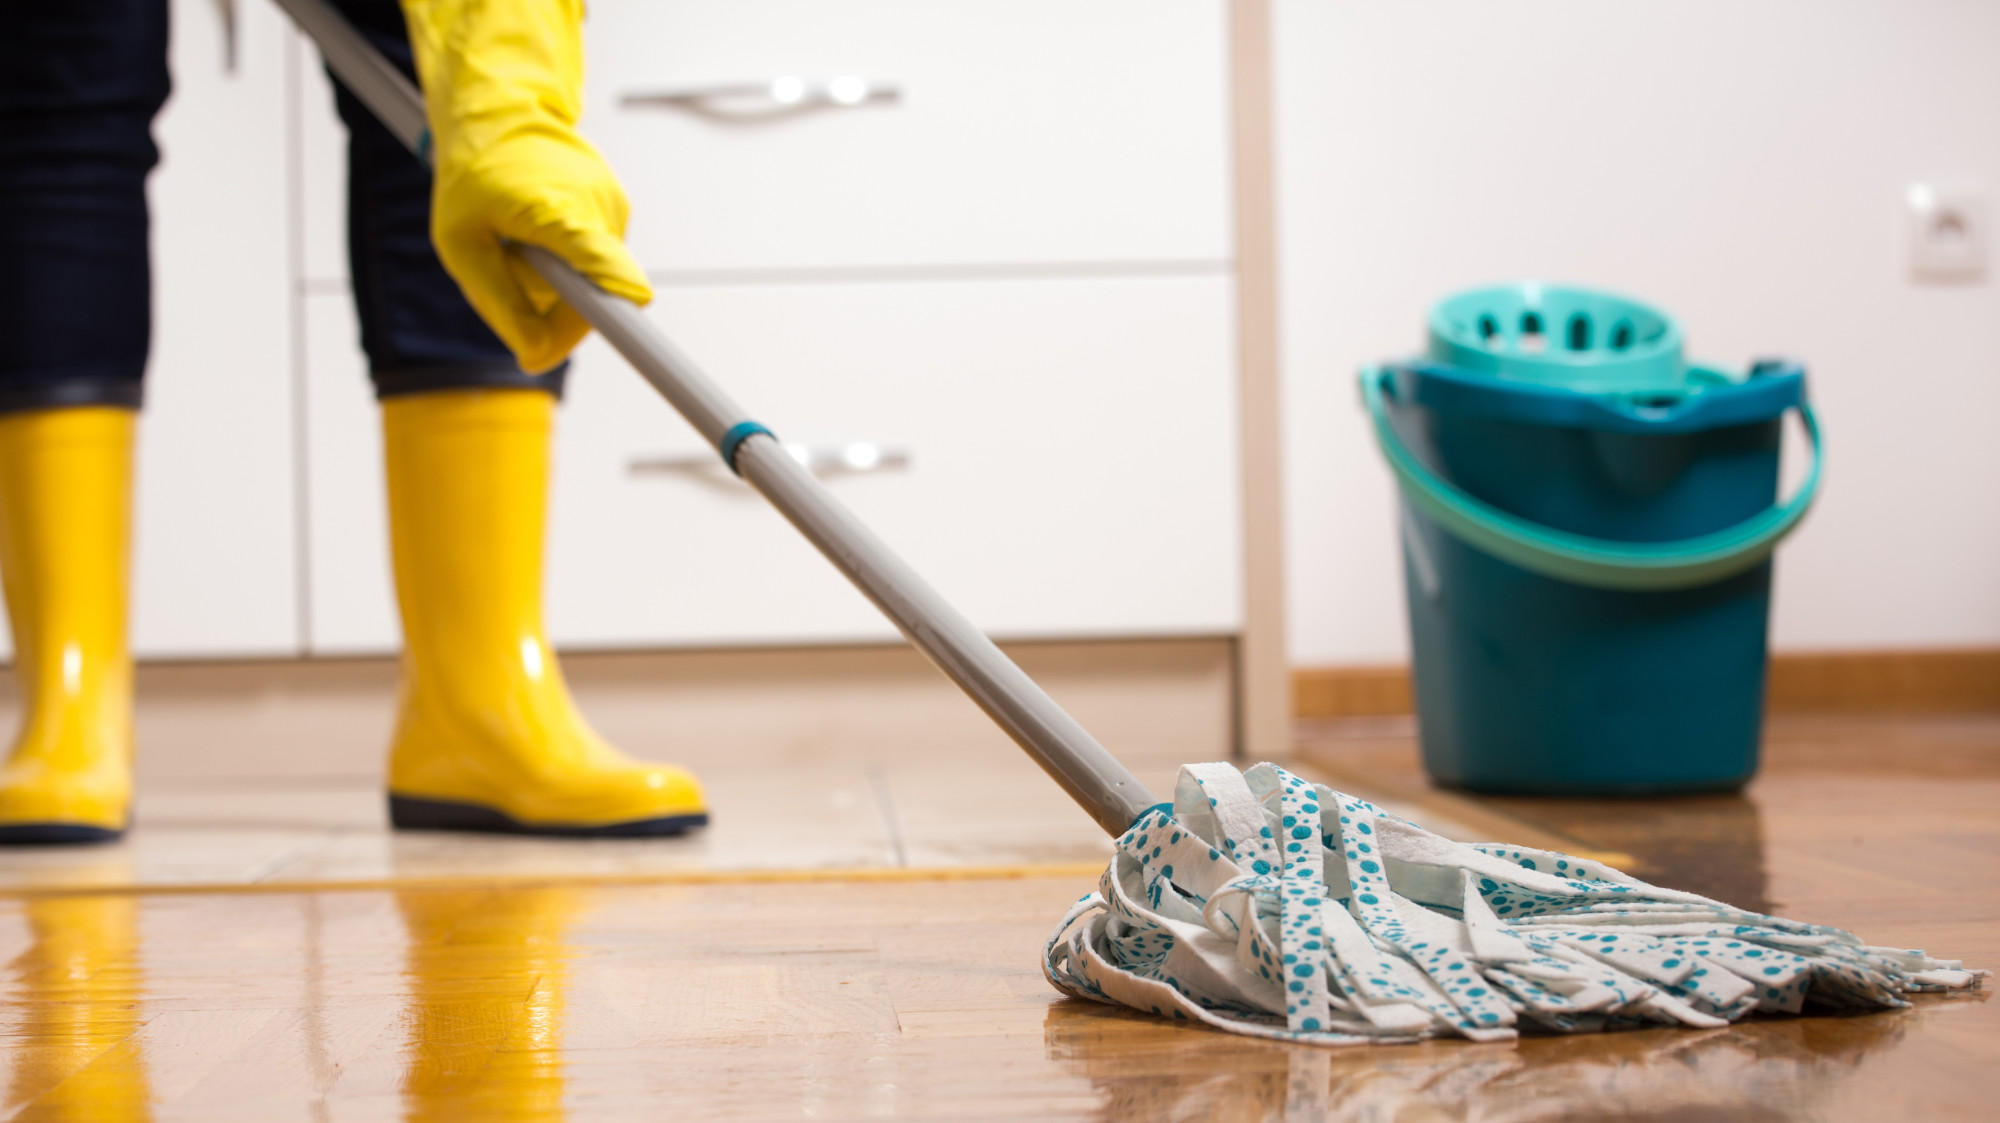 Floor cleaning company near me: Do you want to know how to choose the right cleaning company? Read on to learn how to make the right choice.